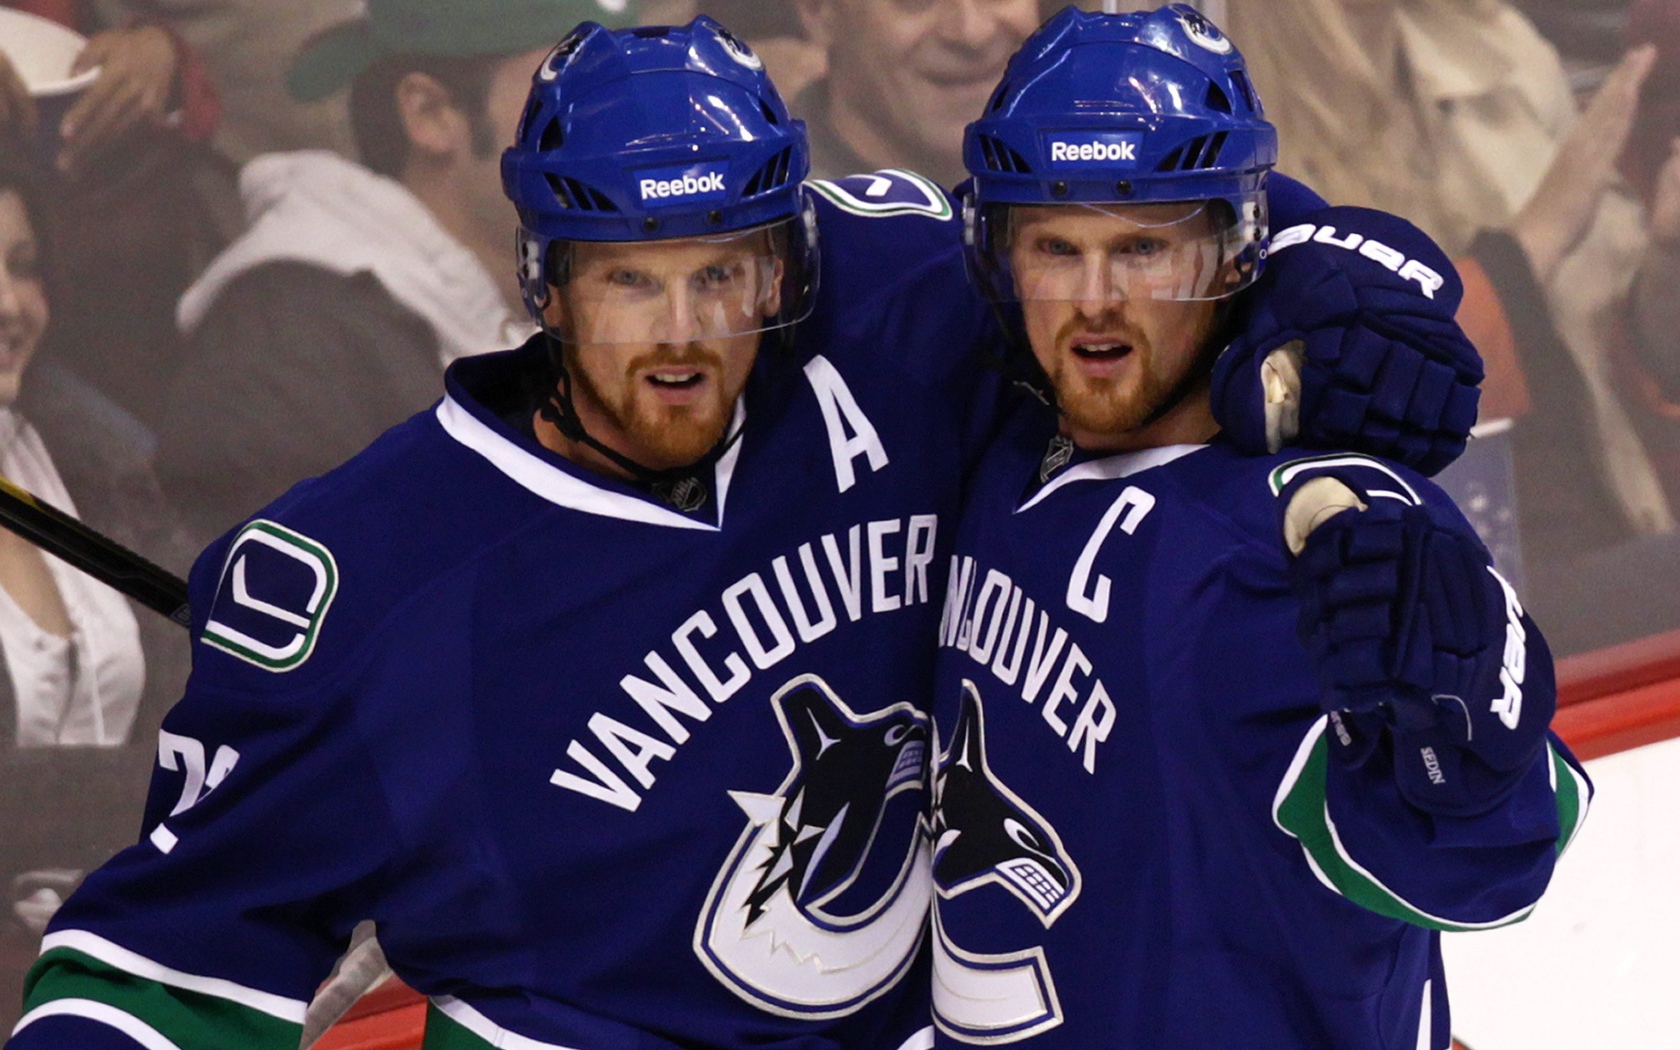 Hockey player Daniel Sedin and his brother 